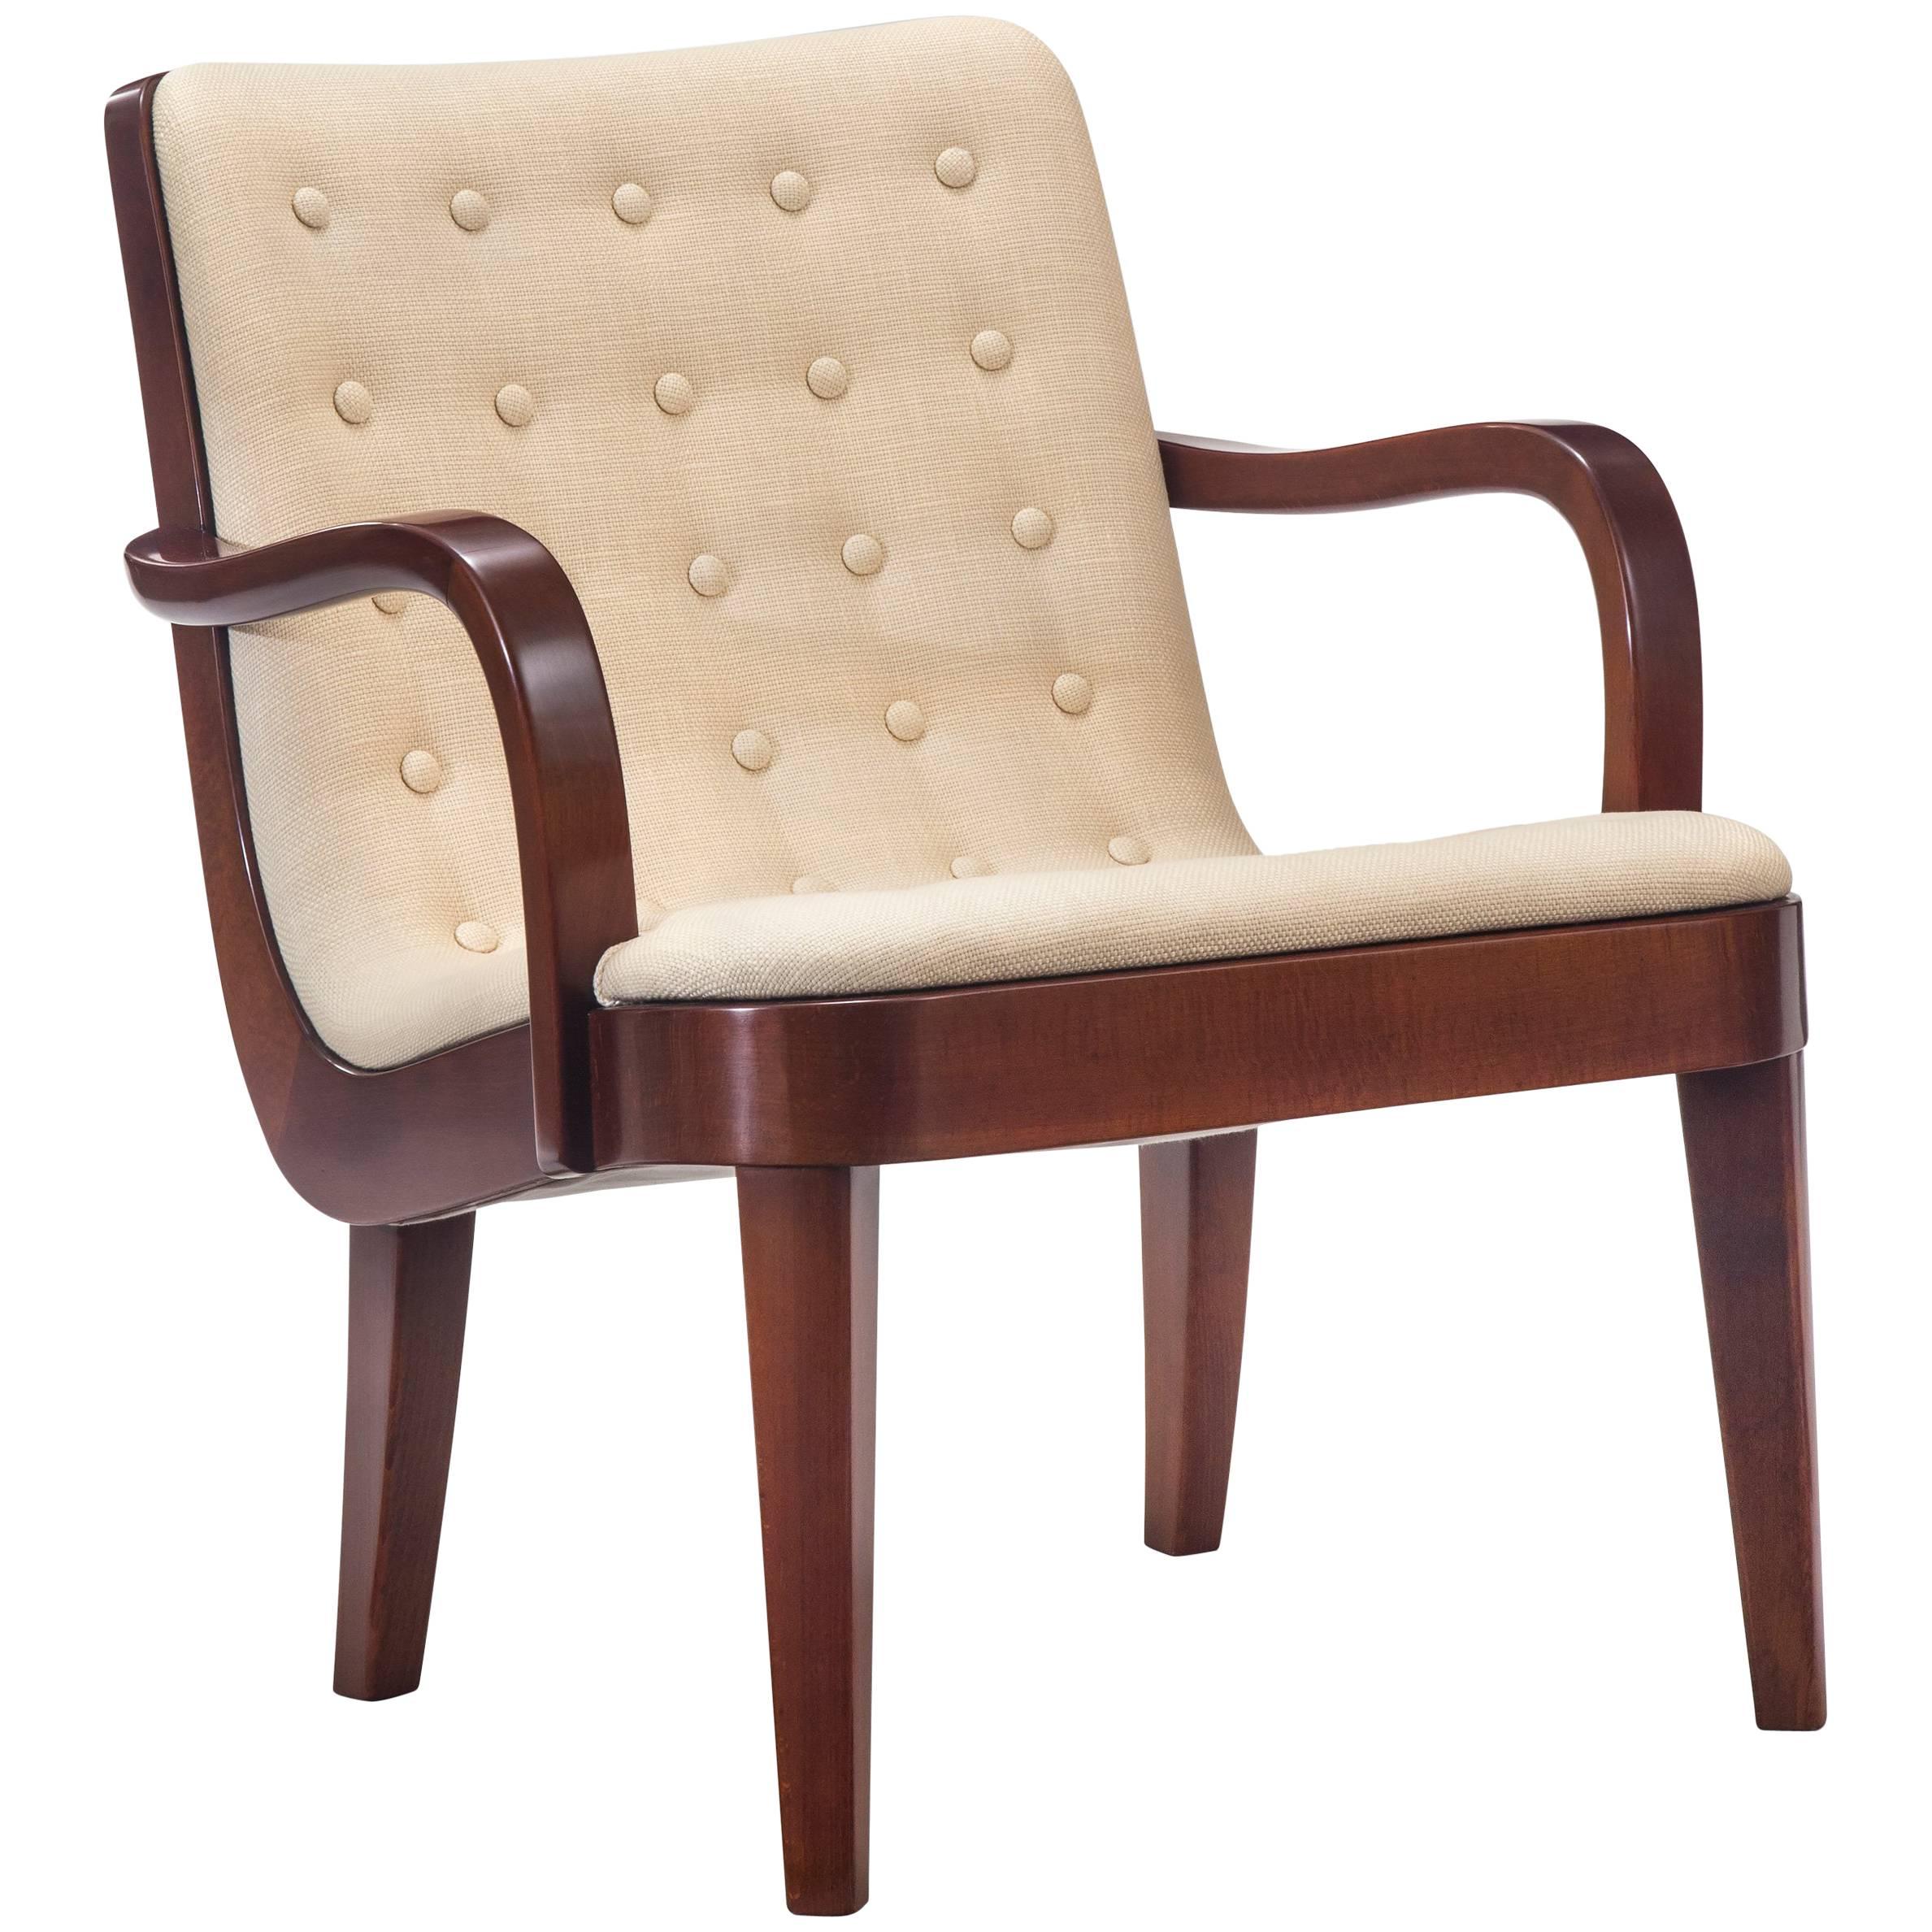 Axel Larsson for Bodafors, Attributed, Swedish Upholstered Beech Armchair